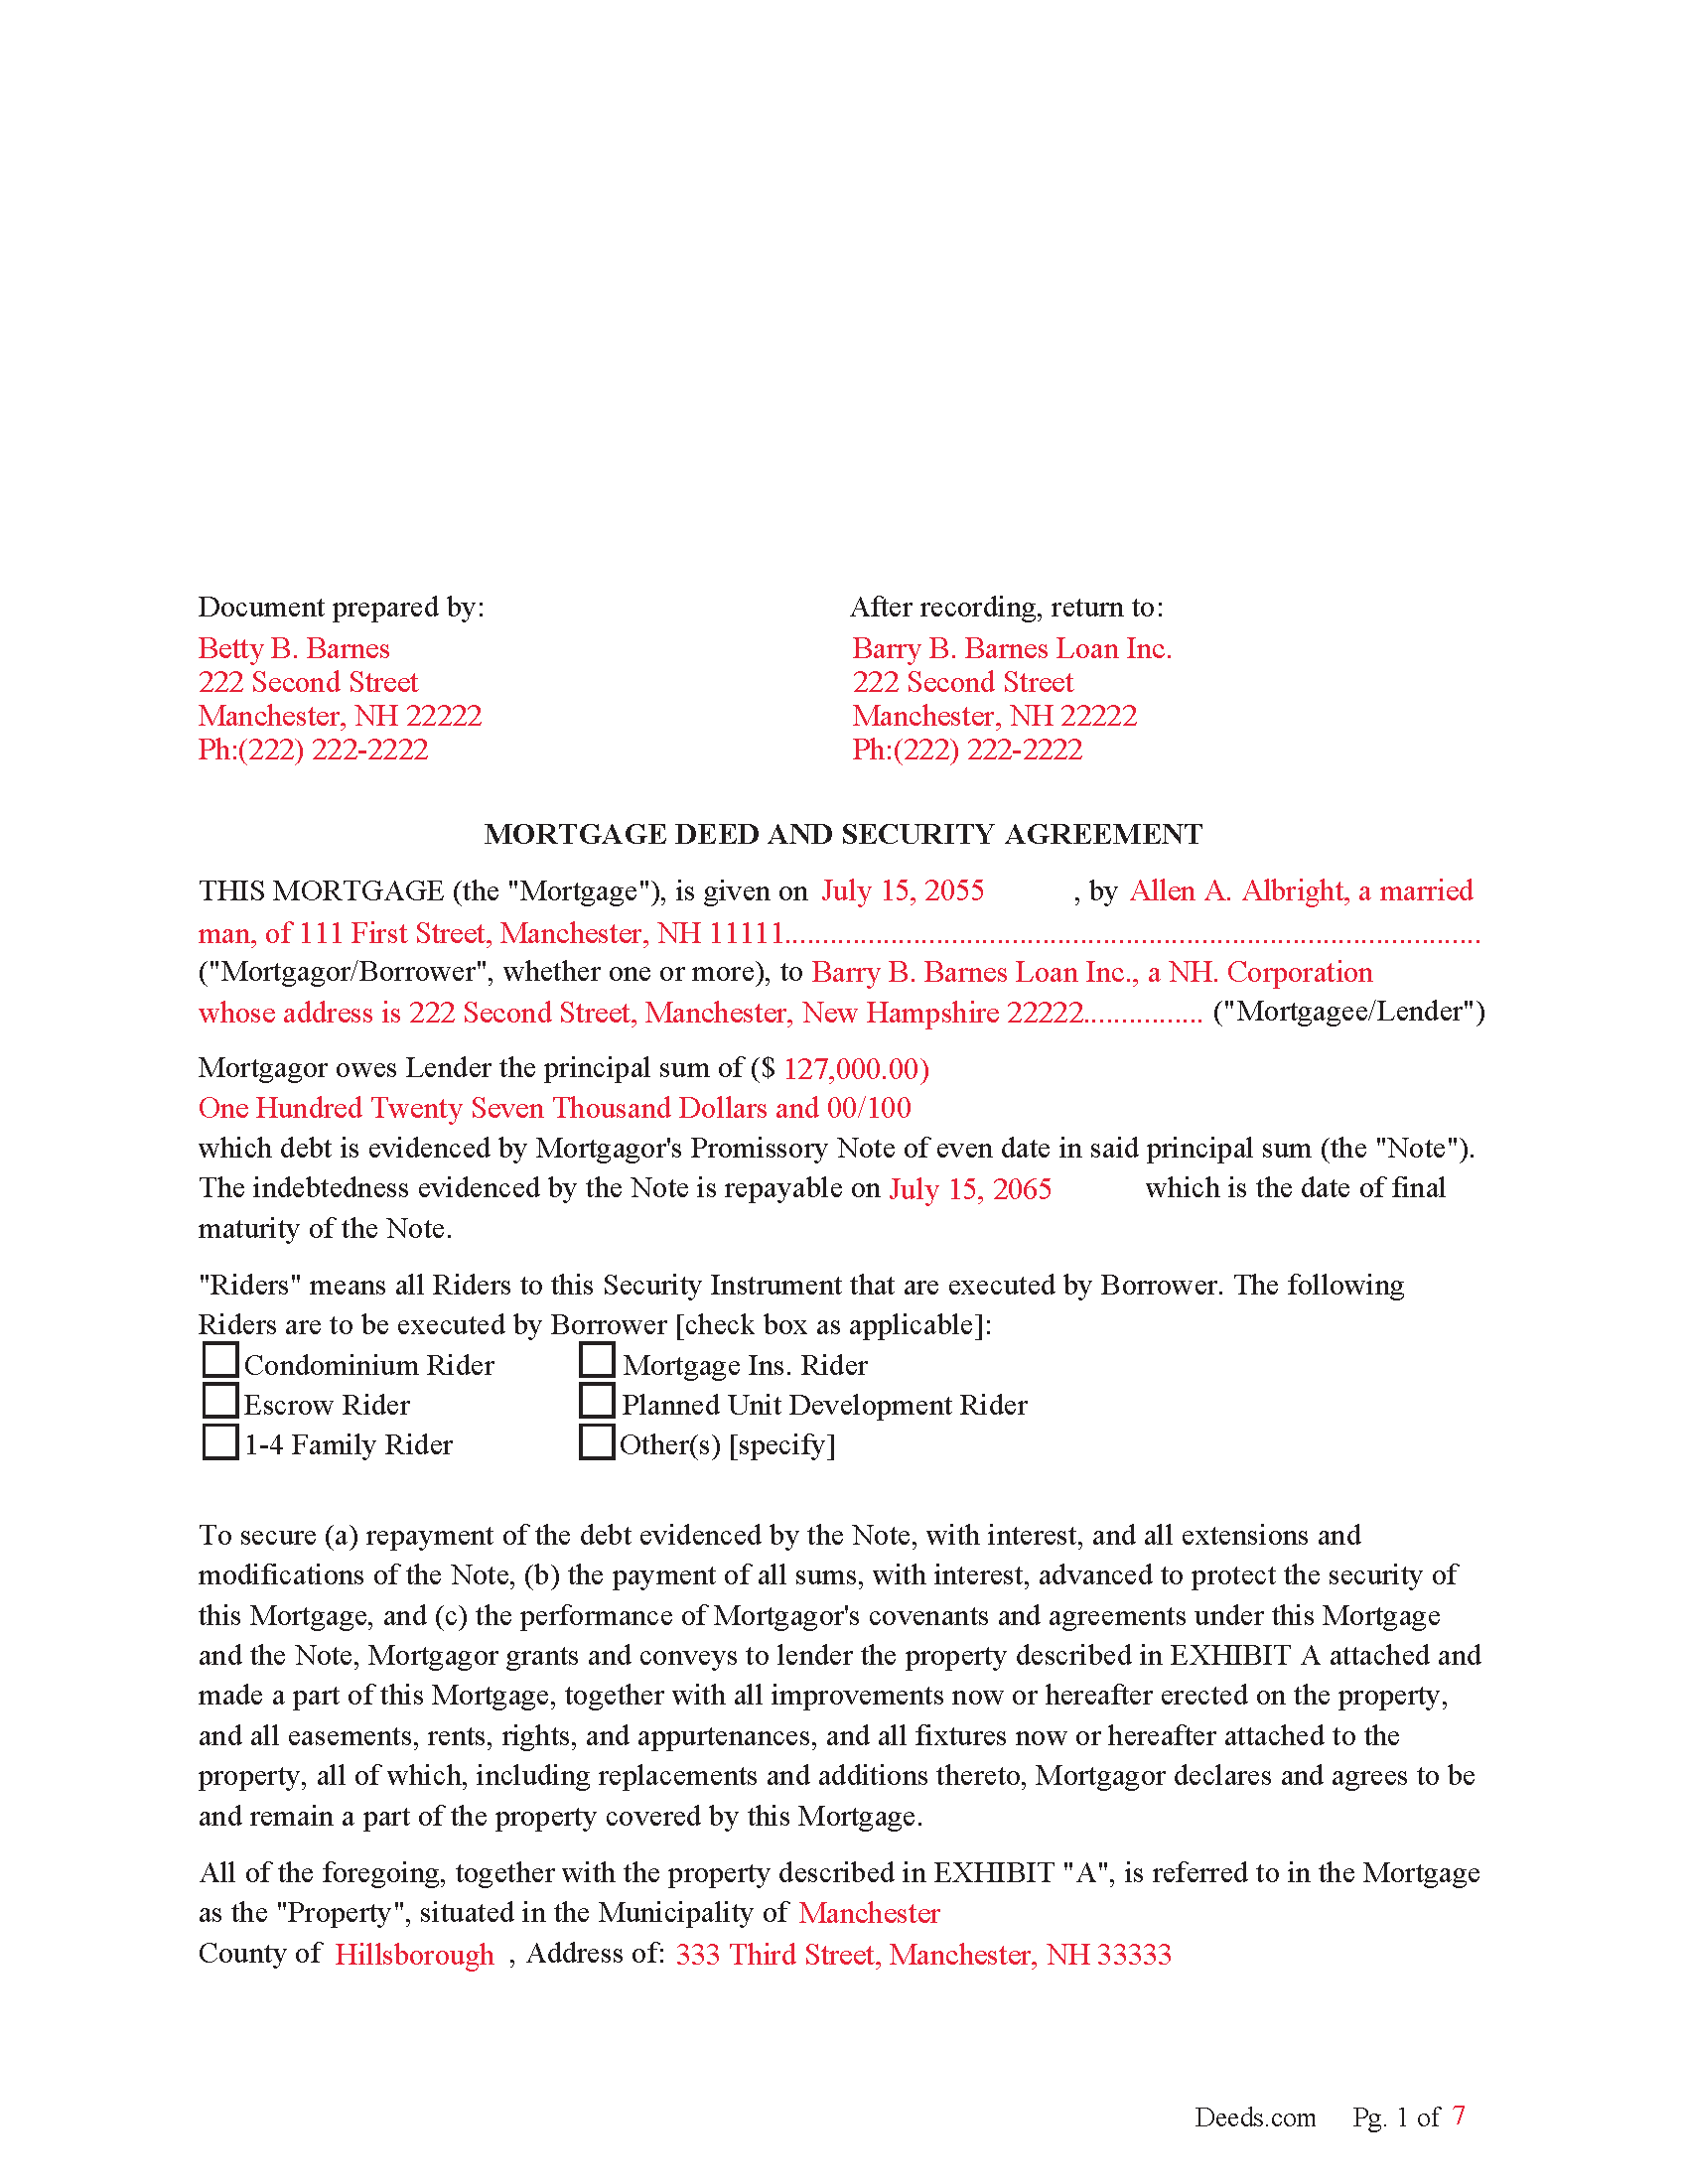 Completed Example of the Mortgage Deed Document